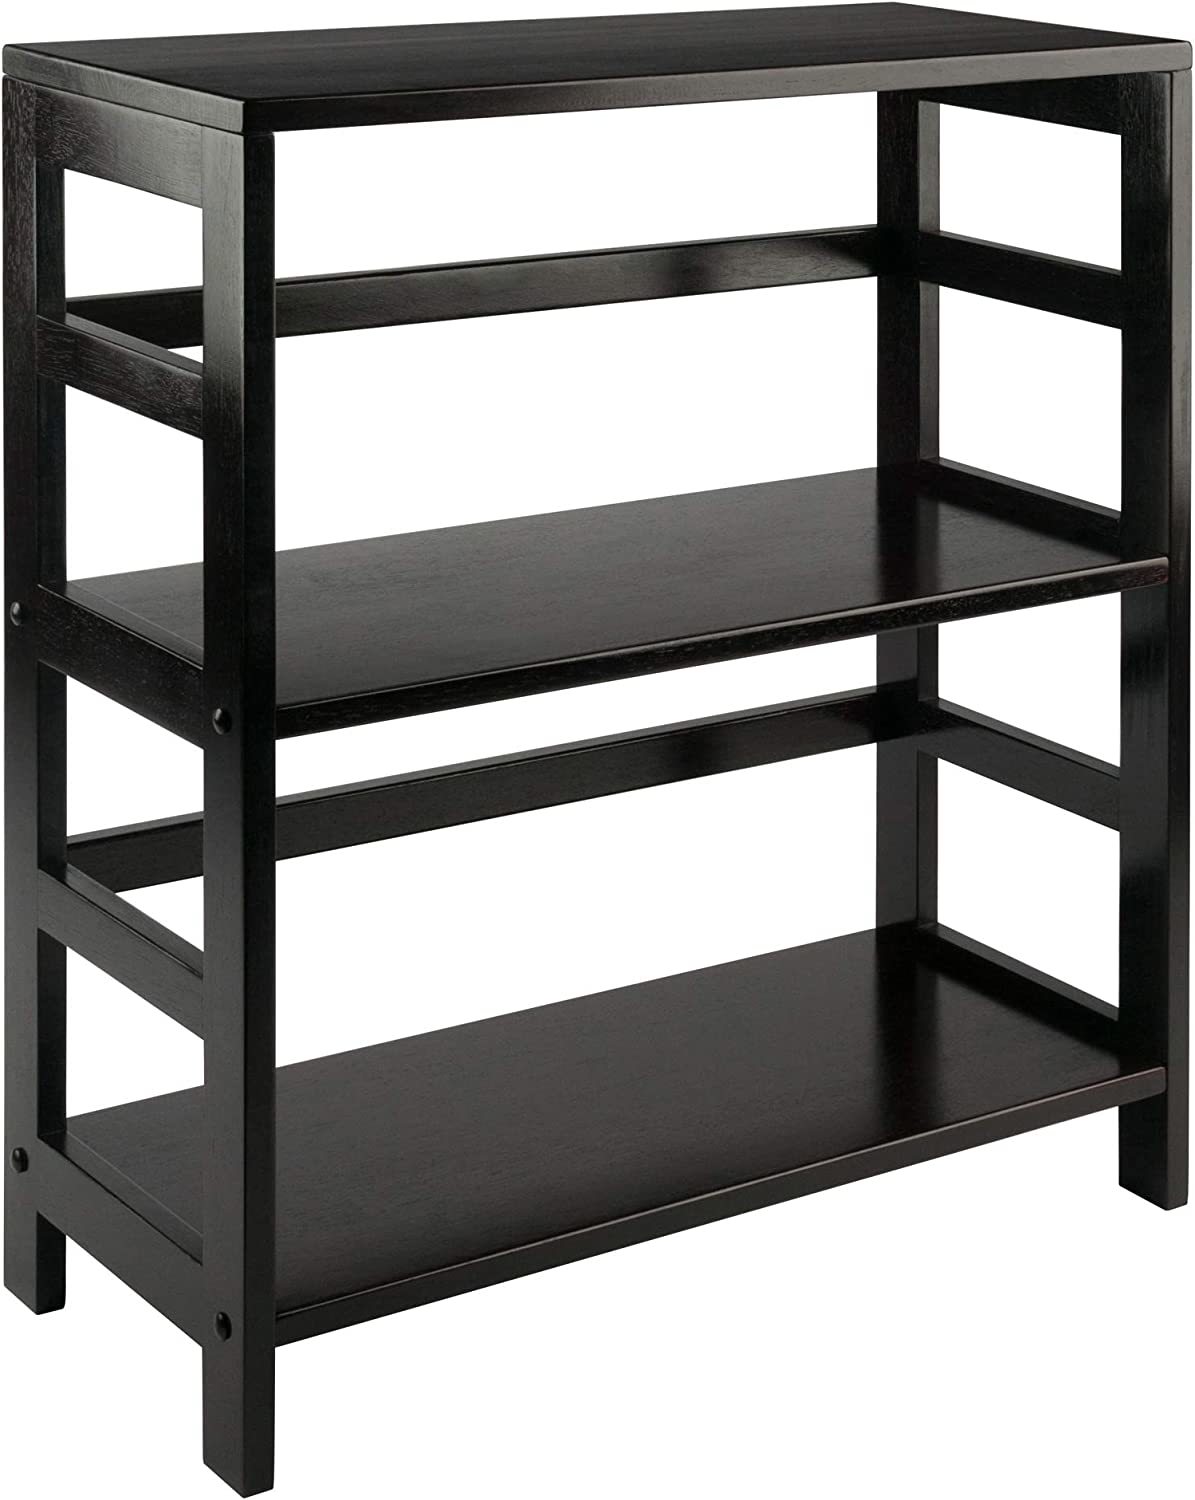 Shelving, Small And Large, Espresso, Winsome Wood Leo Model. - $65.97